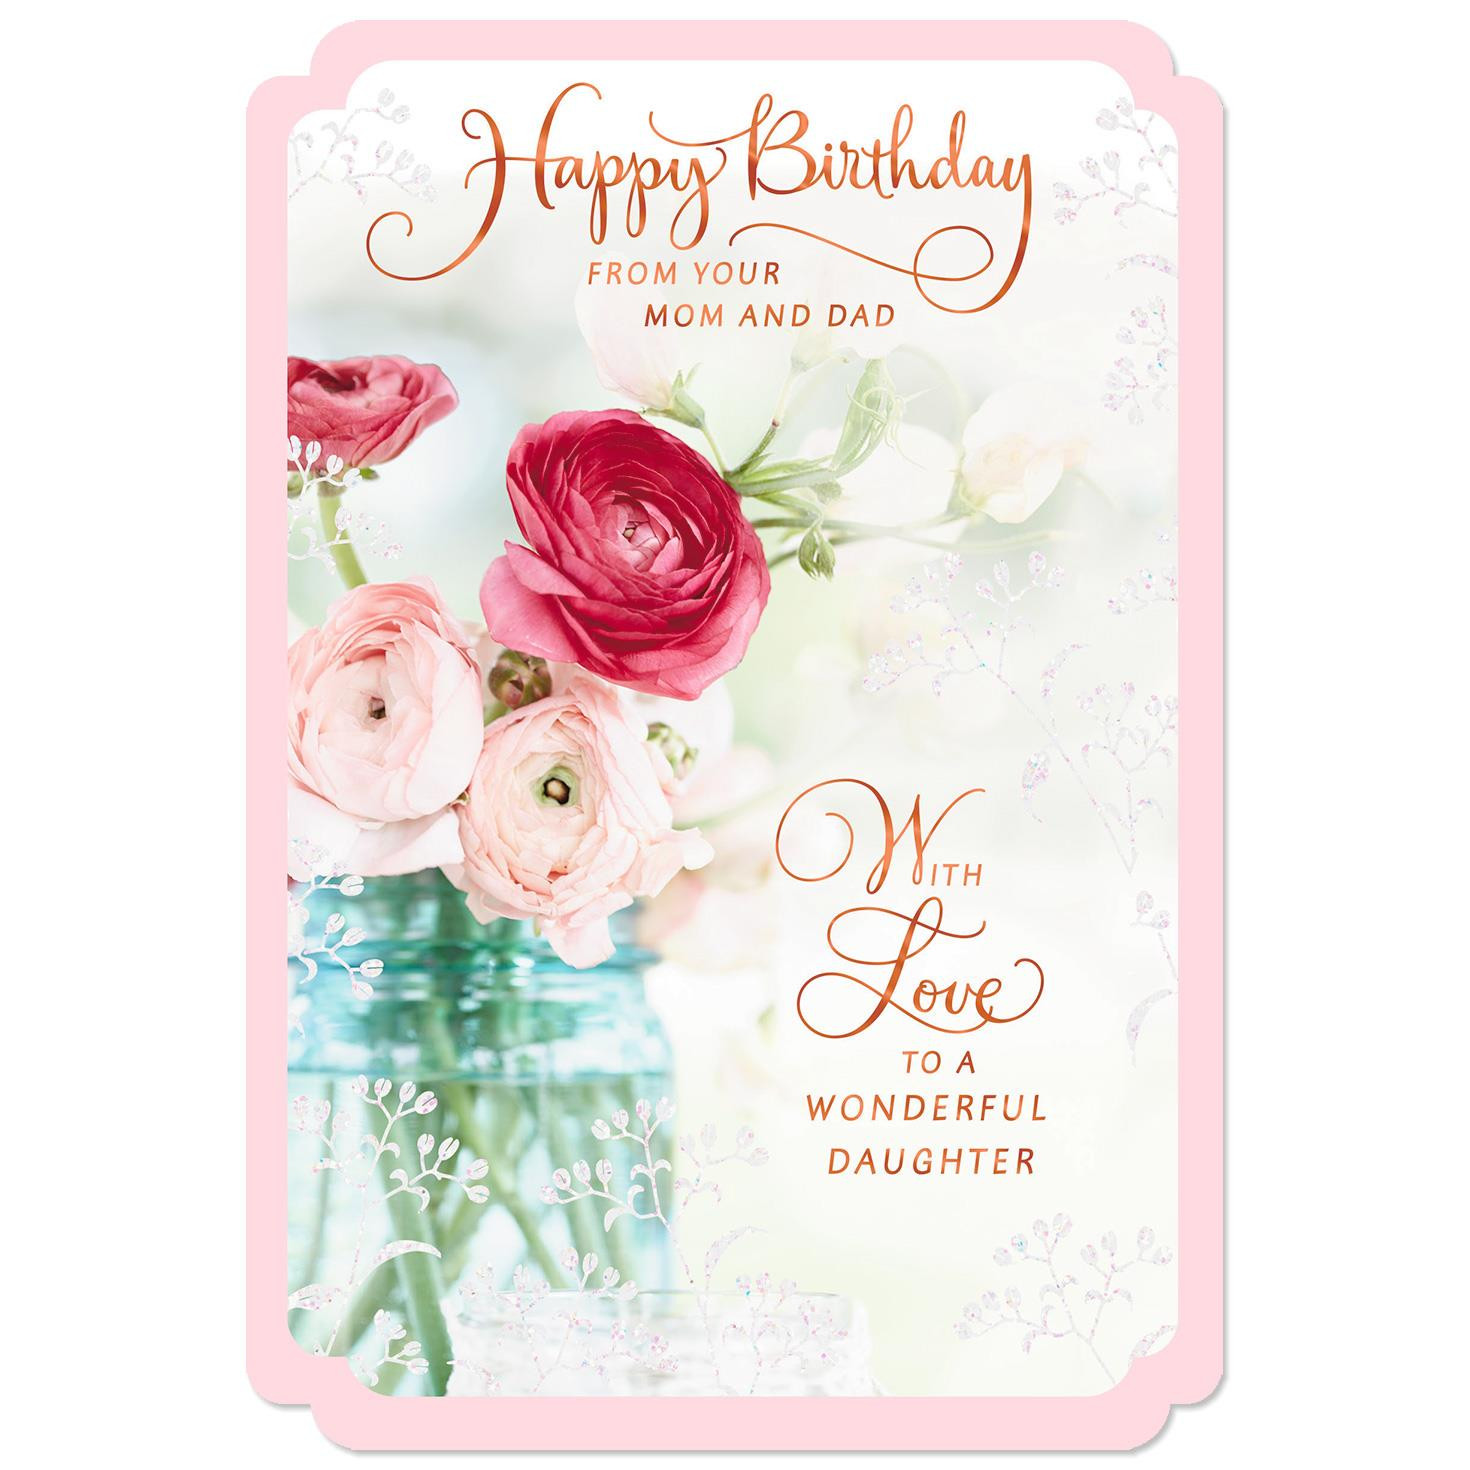 Hallmark Birthday Wishes
 Wishes for a Wonderful Daughter Birthday Card from Mom and